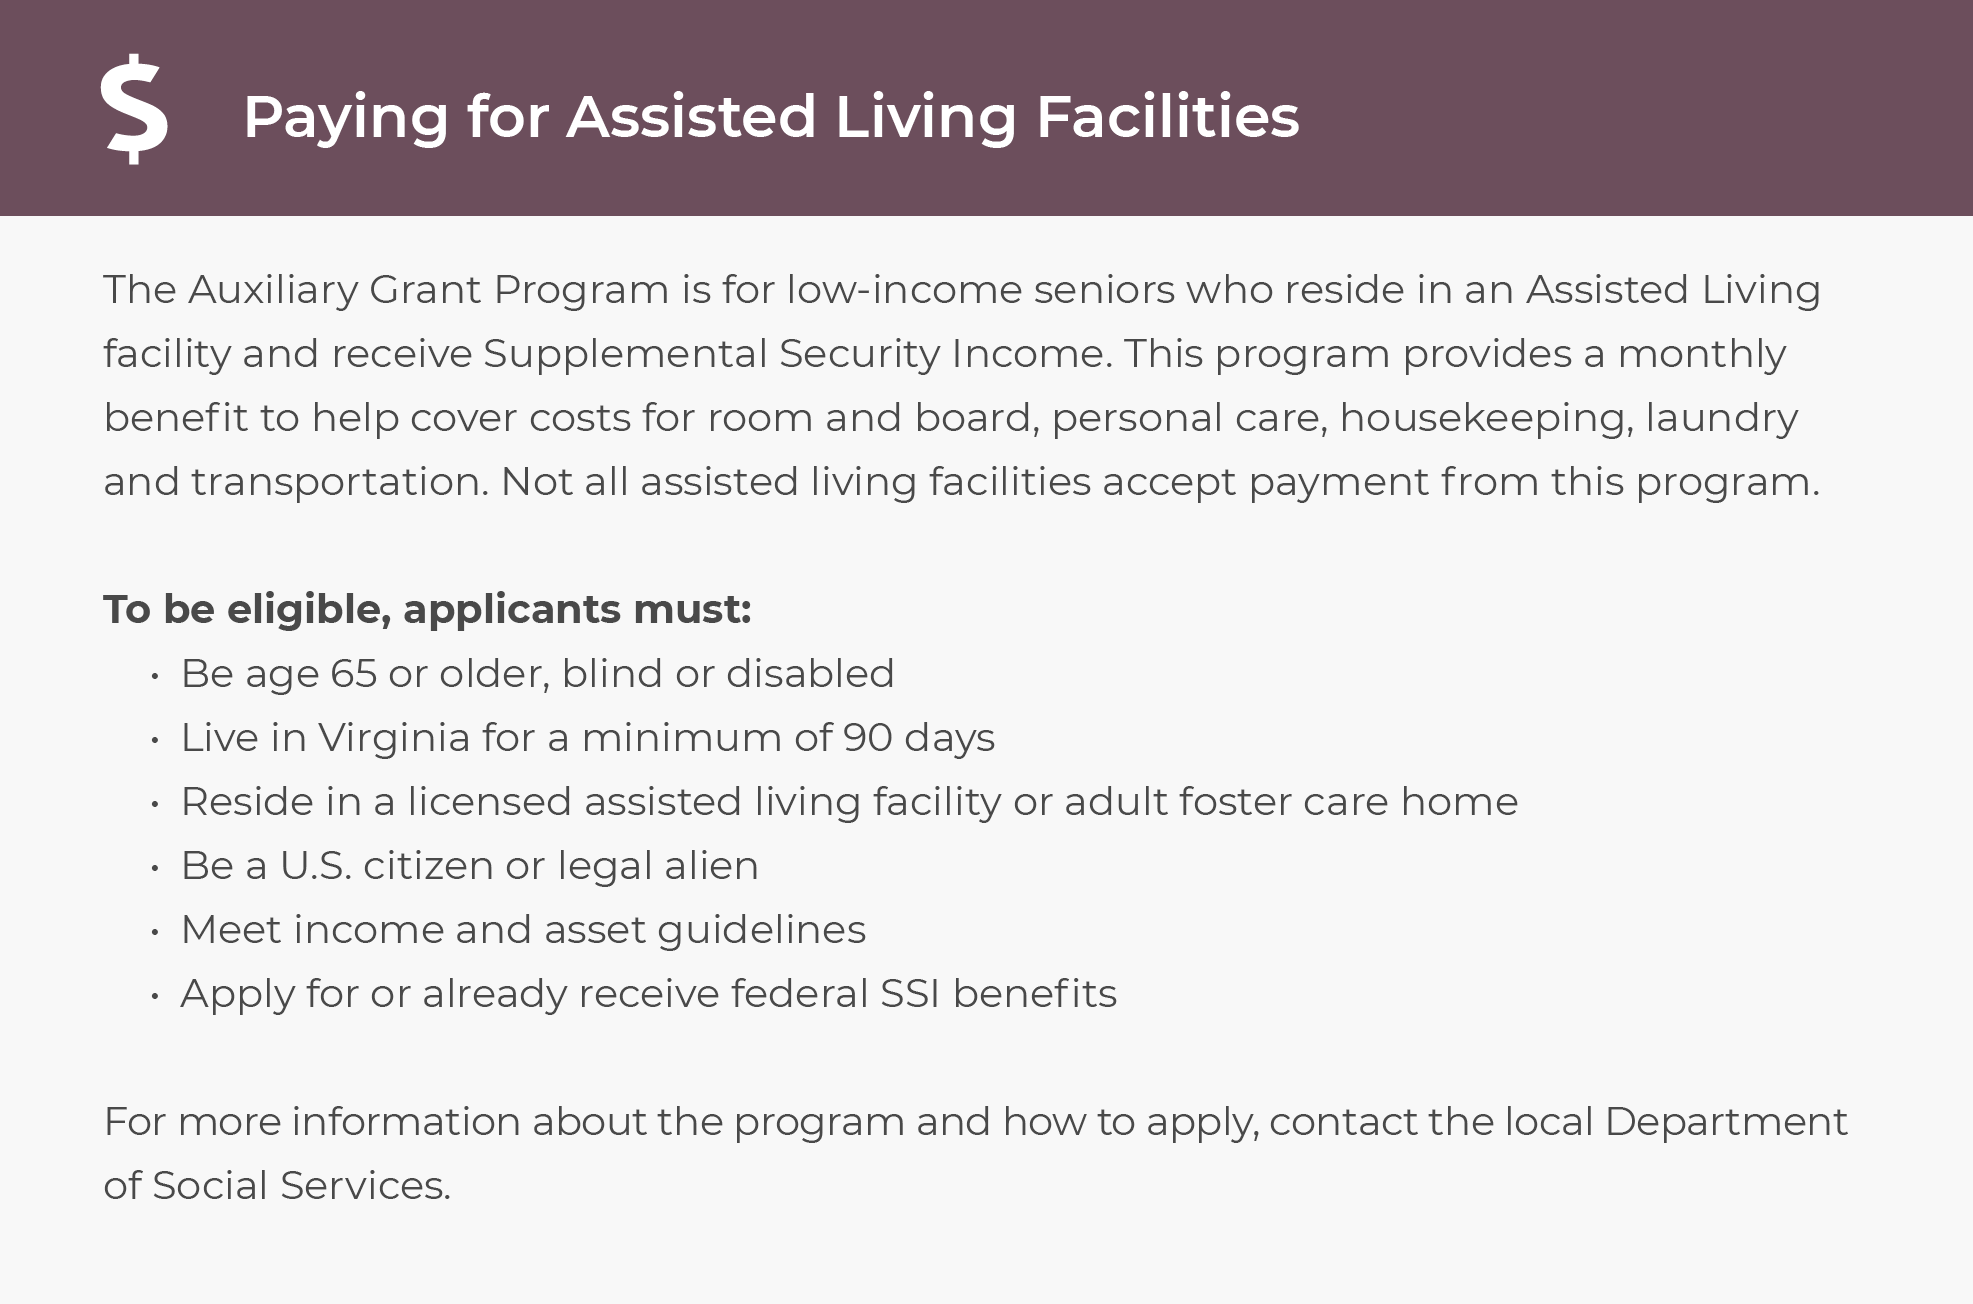 Paying for assisted living in Virginia